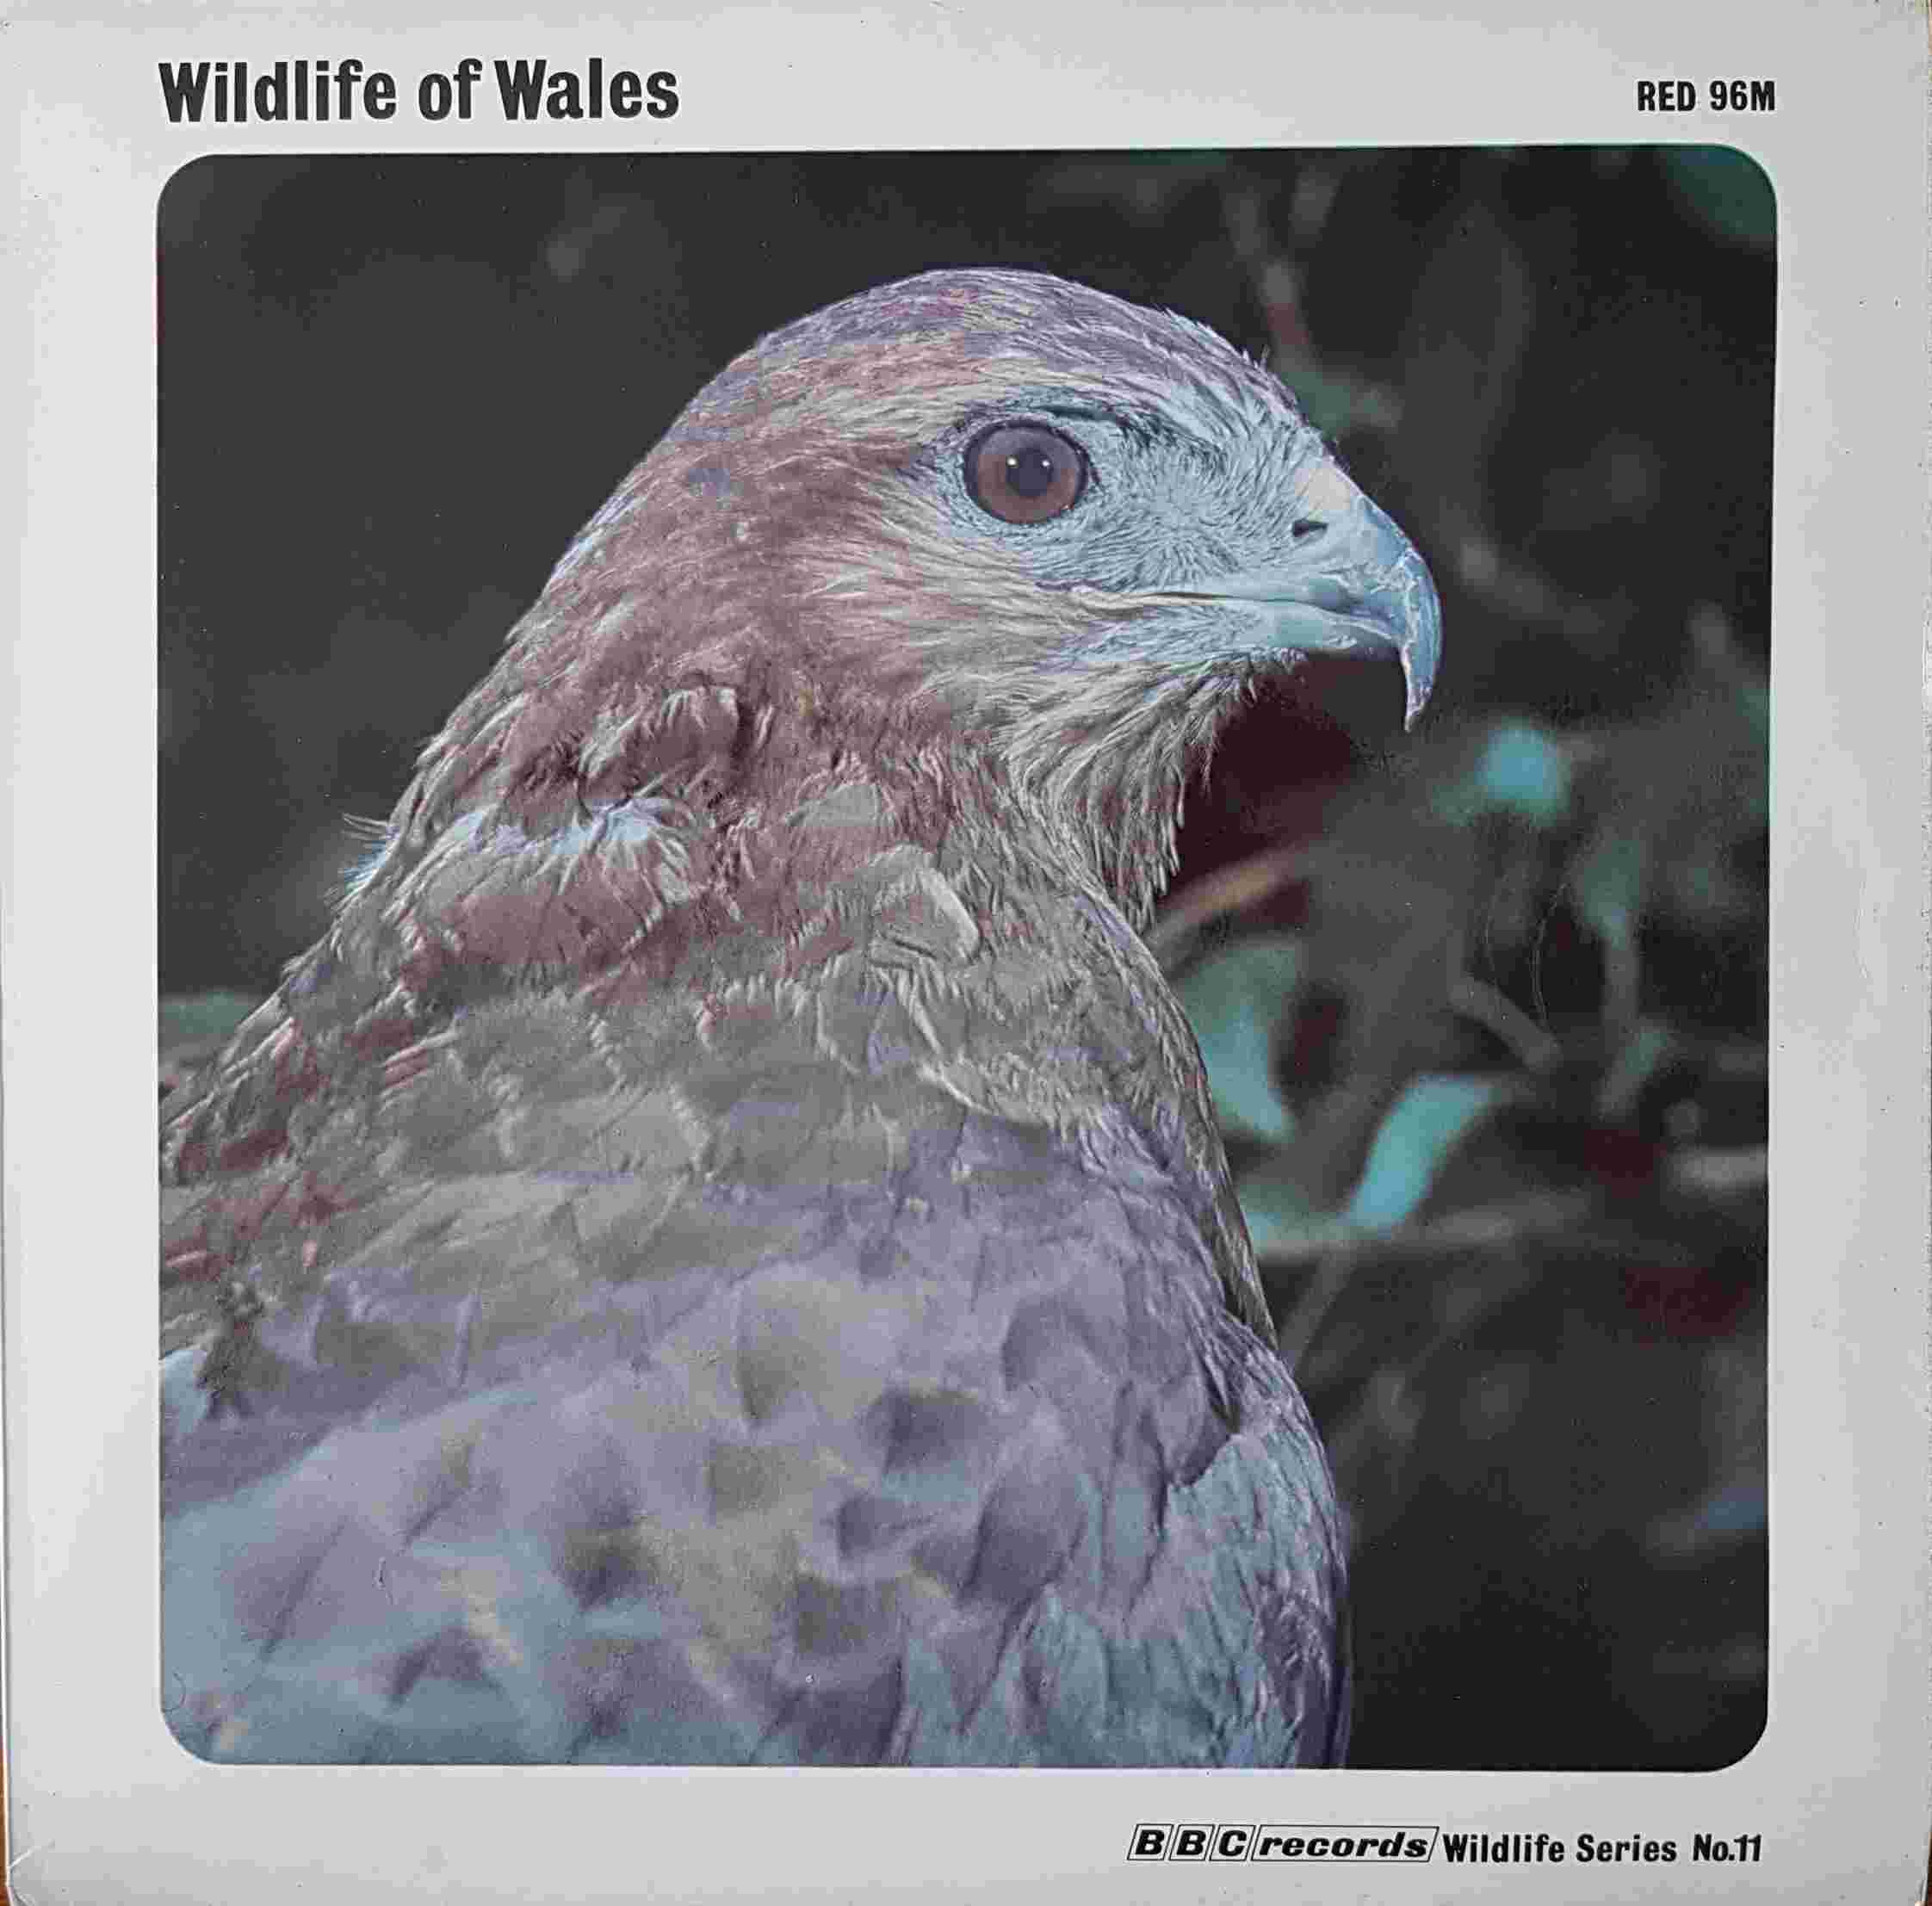 Picture of RED 96 Wildlife of Wales - BBC wildlife series no. 11 by artist Various from the BBC albums - Records and Tapes library